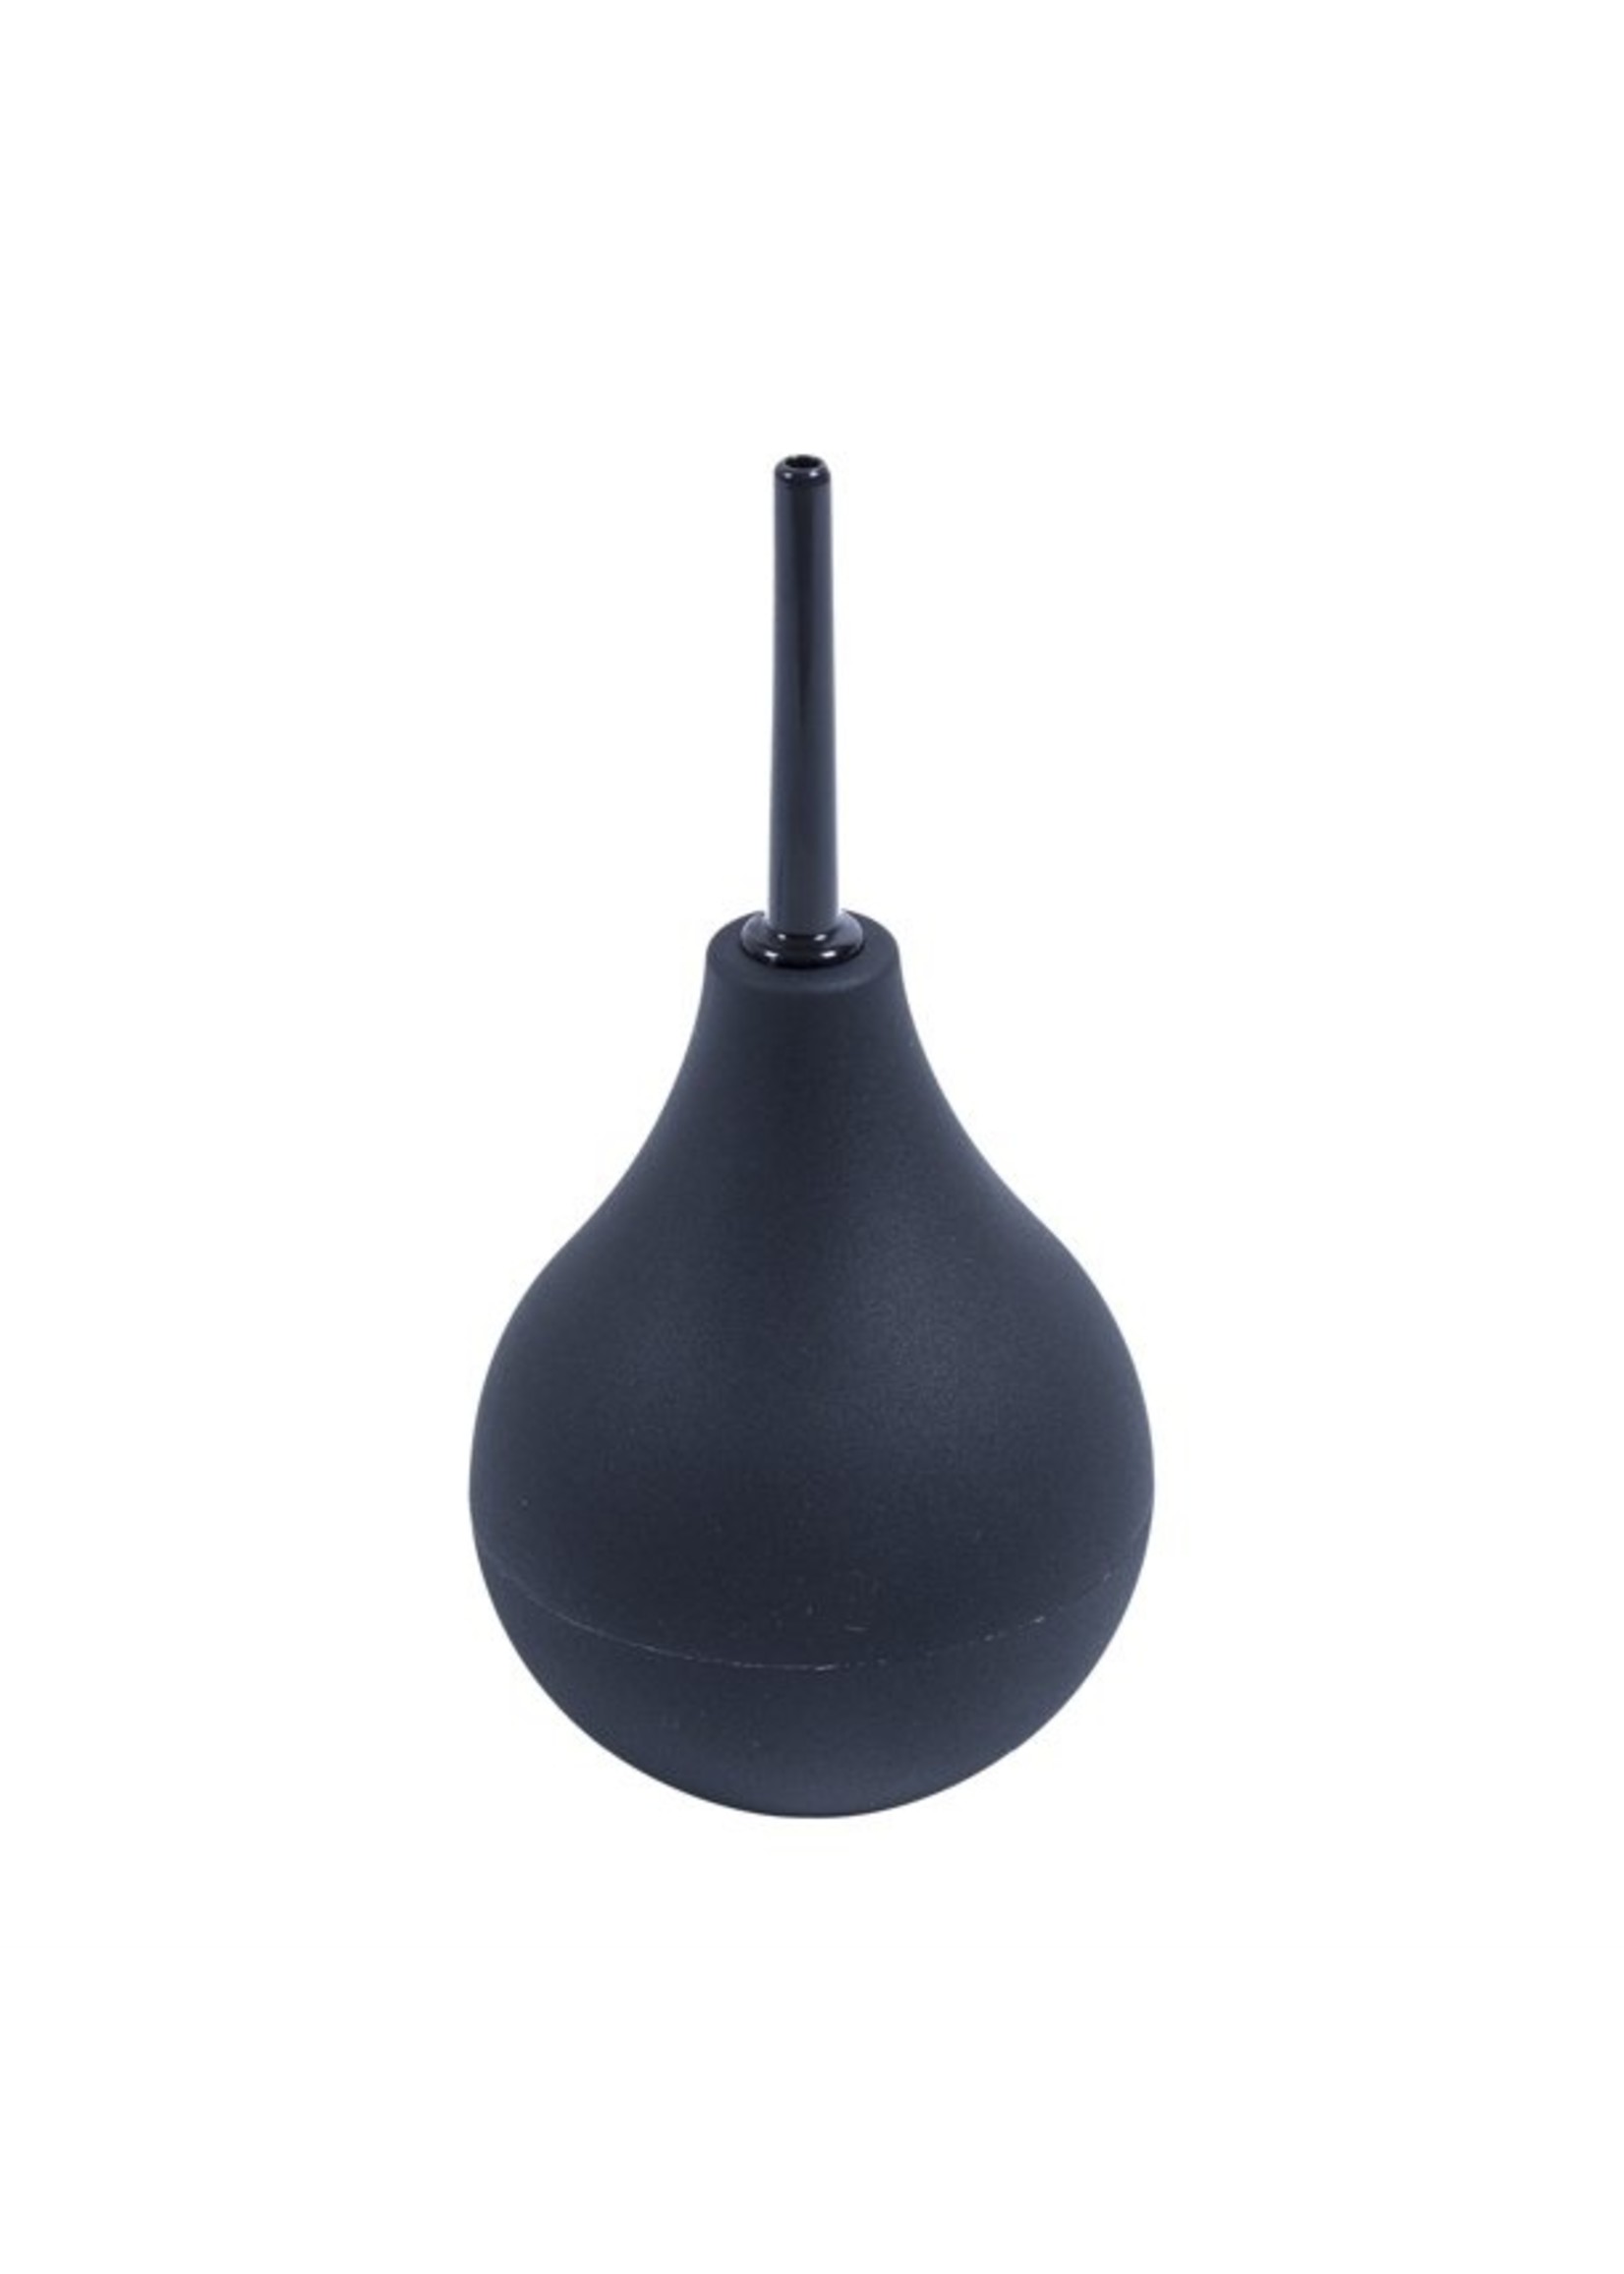 Prowler Bulb Anal Douche in Black - Large